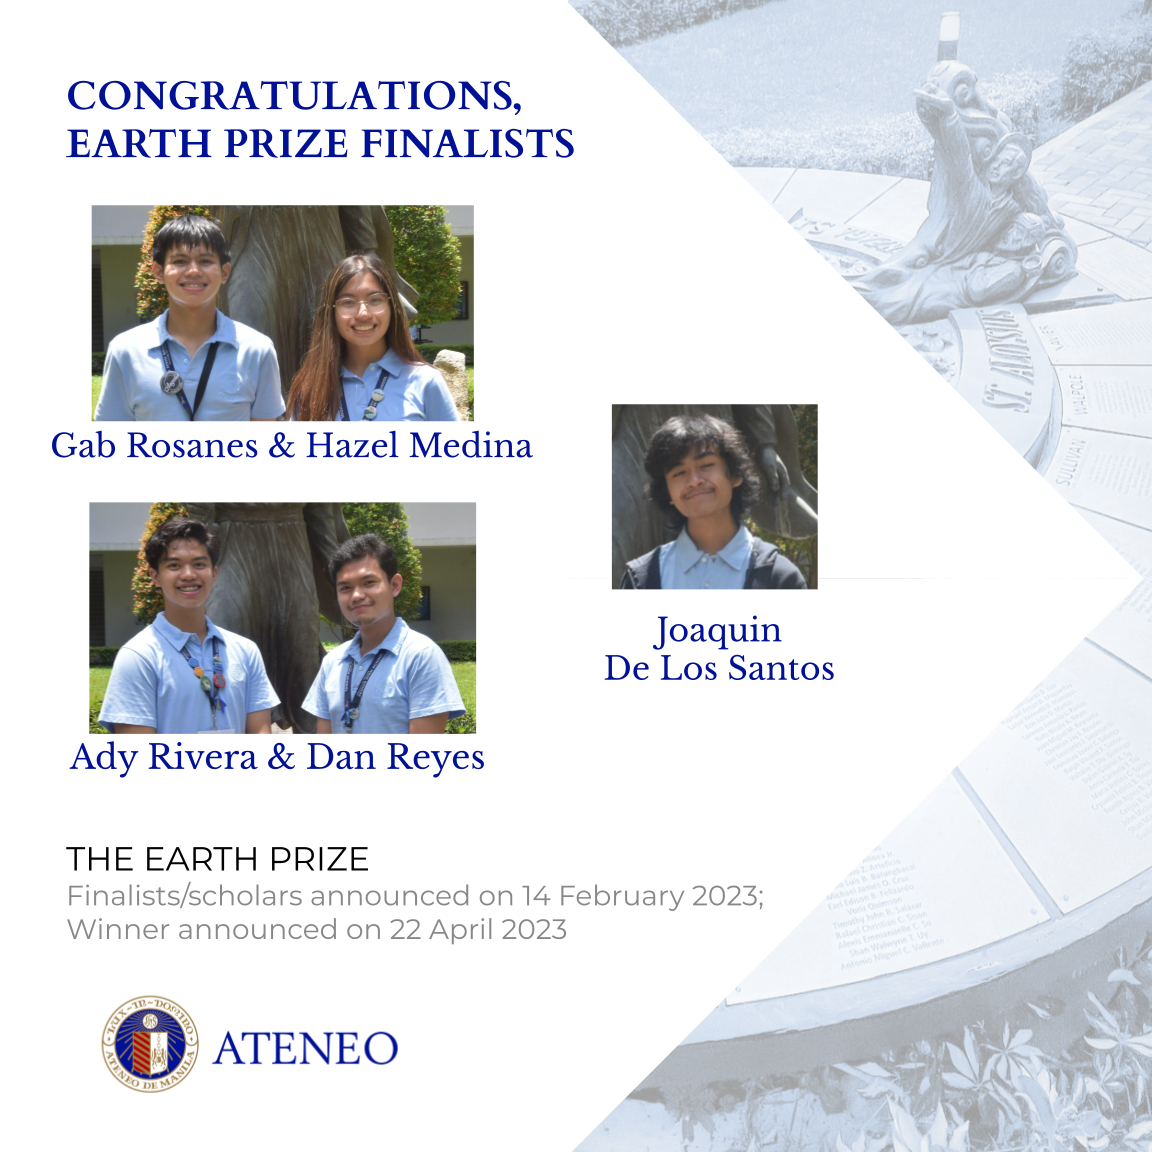 The Earth Prize scholars/finalists from the Ateneo de Manila SHS  